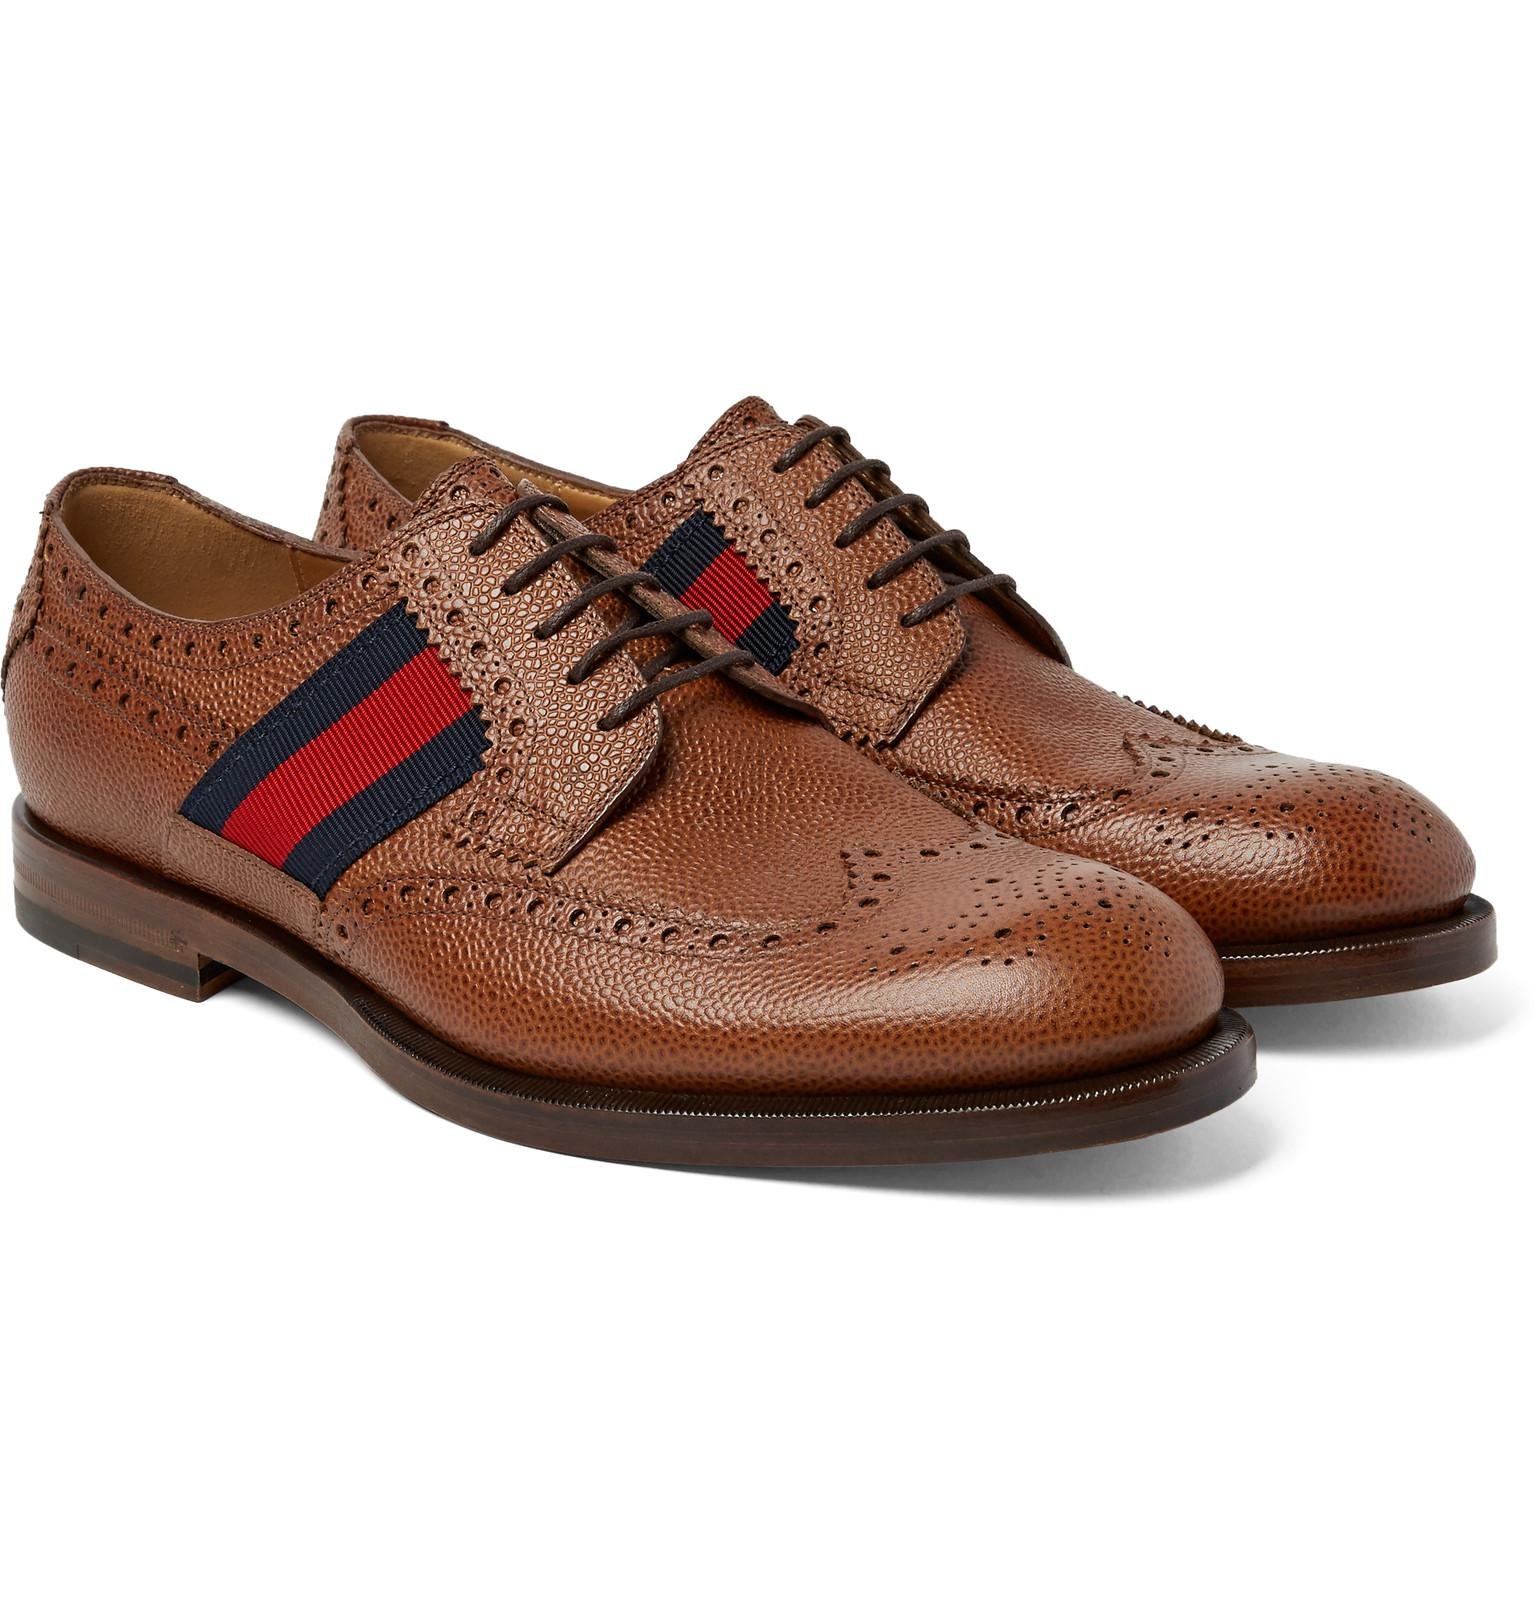 Gucci Men's Shoes Brown Pebbled Leather Oxfords (GGM1543)